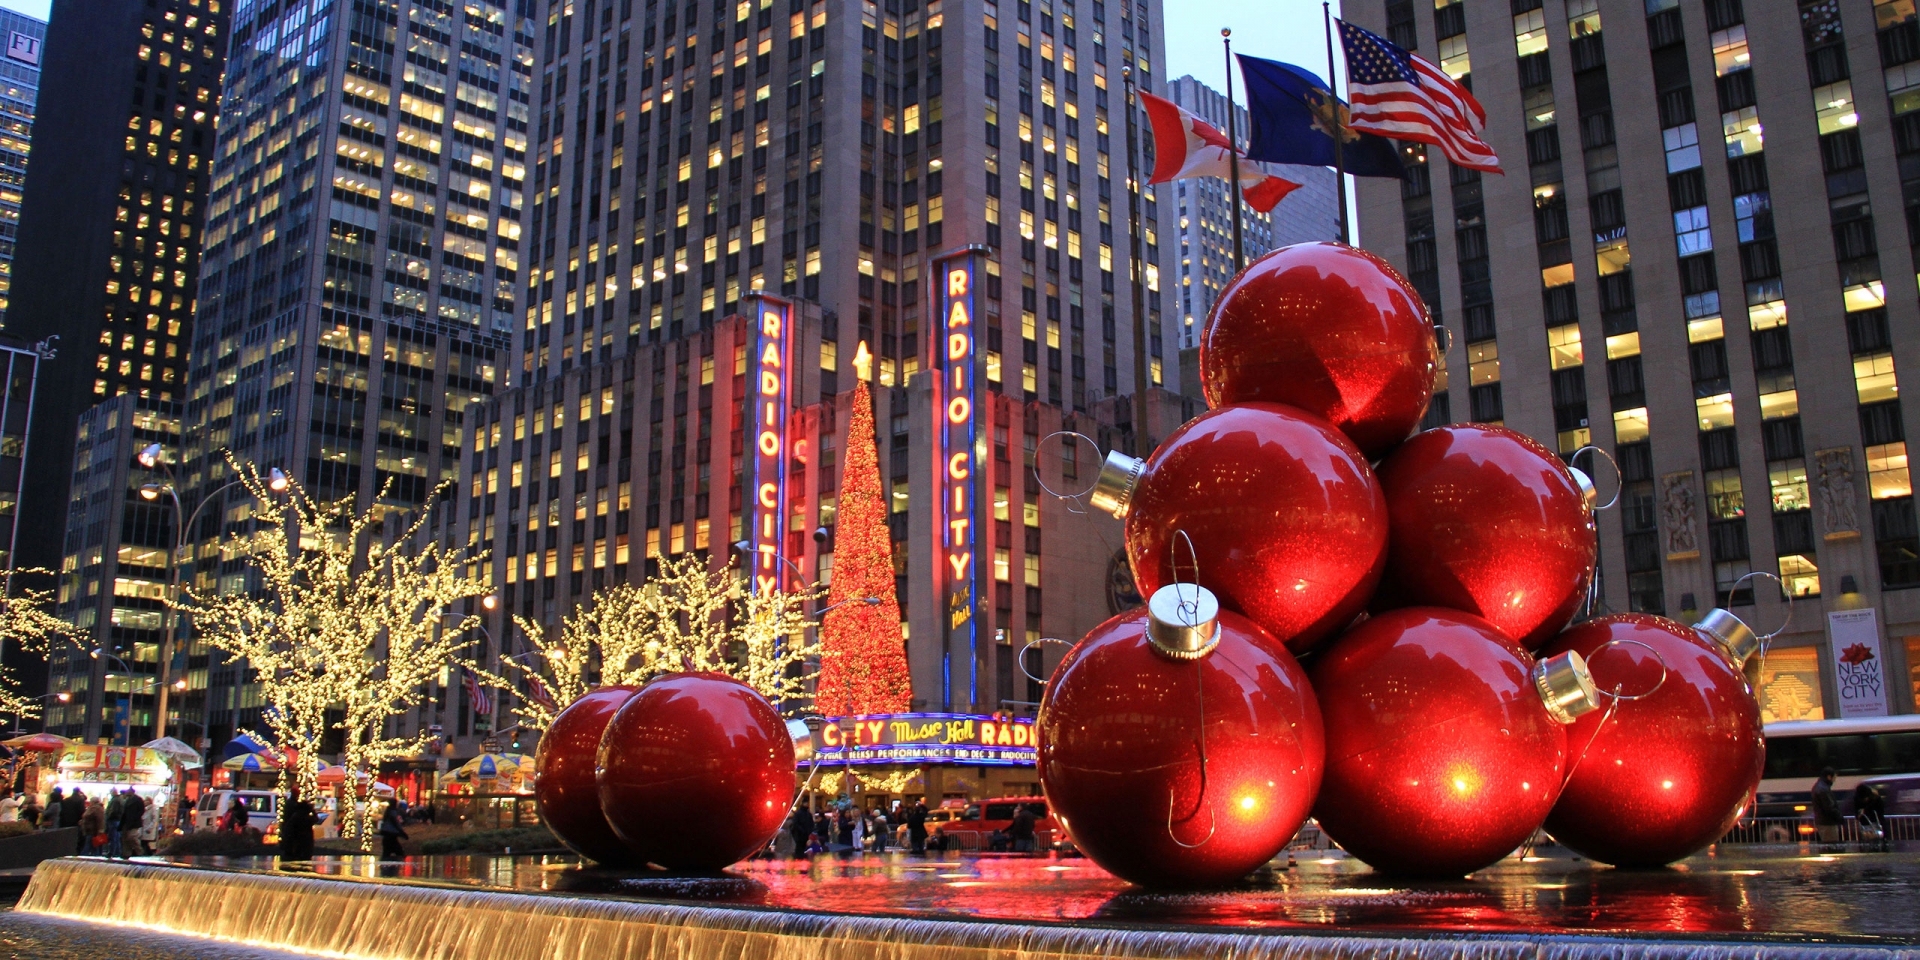 Top 7 best places to visit in the U.S during Christmas